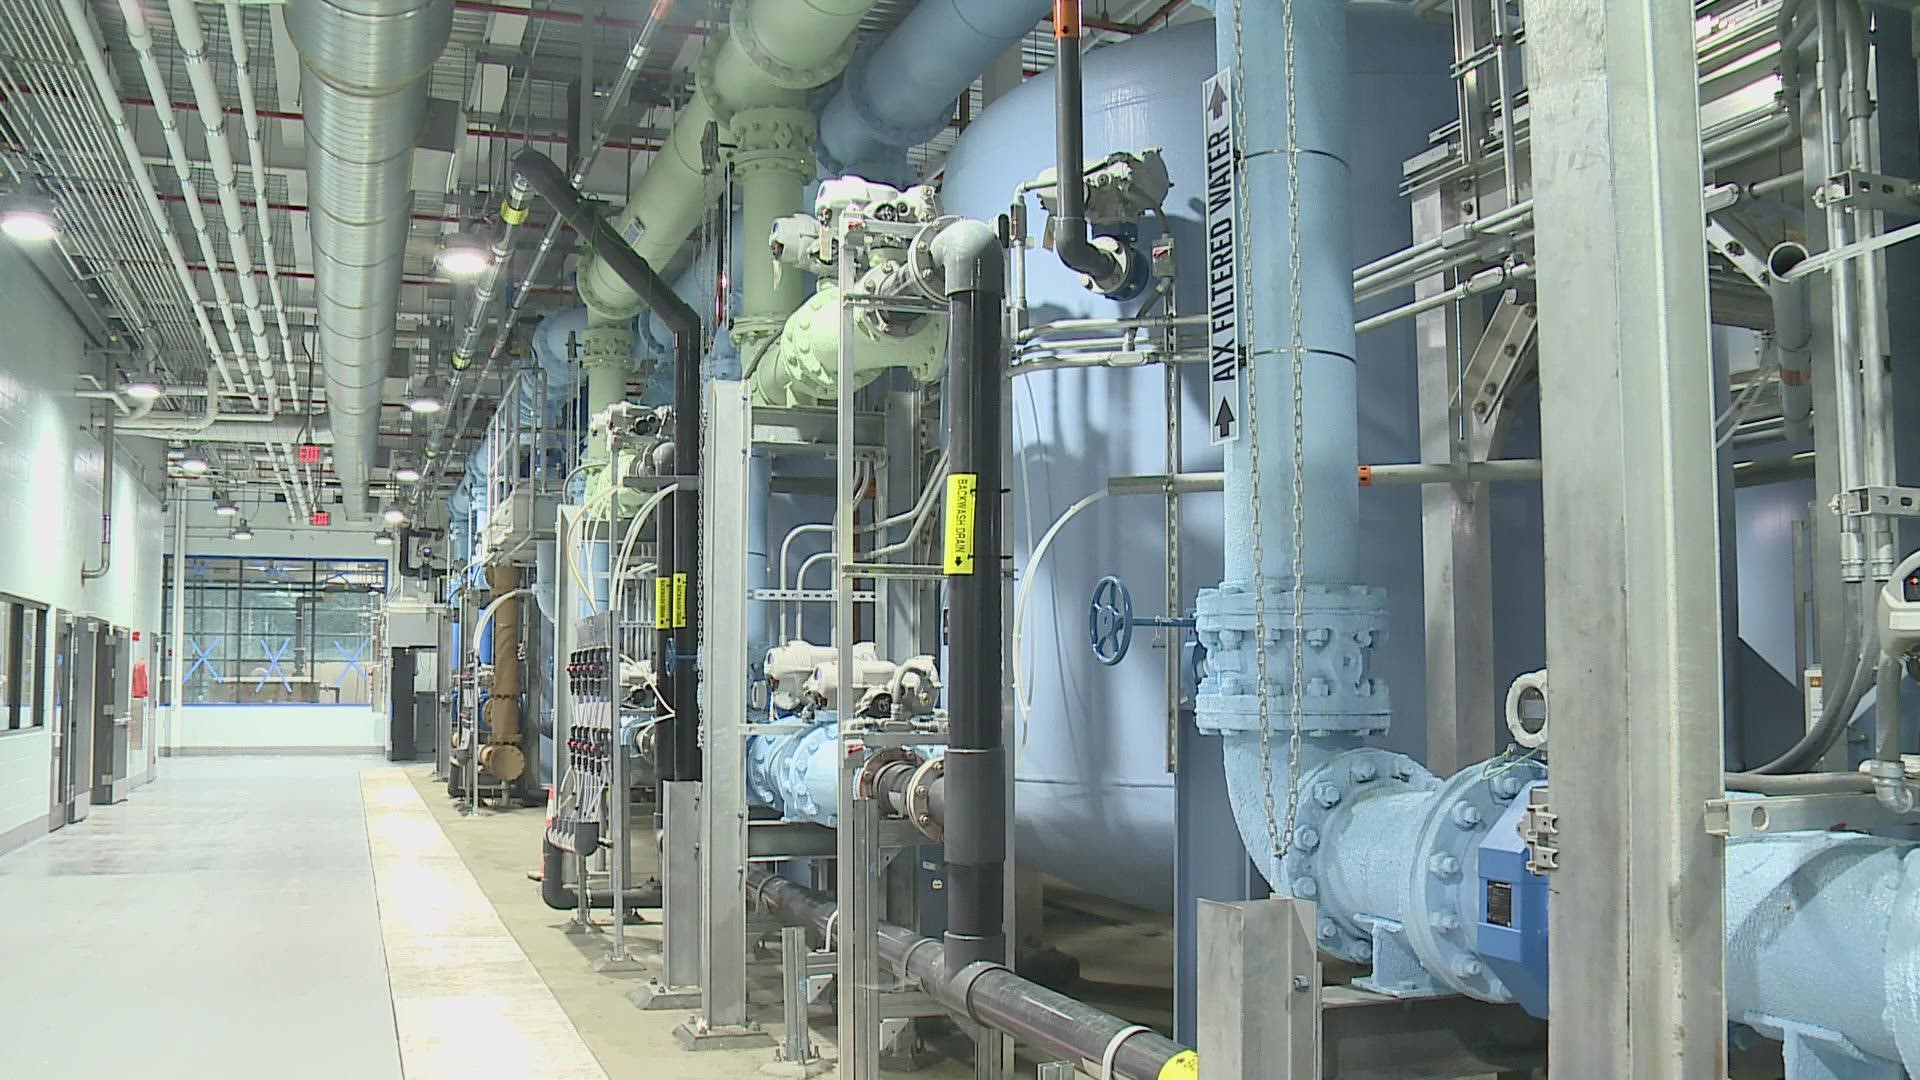 Water district leaders say the new processing plant will help improve the quality of the water. The new facility will cost about $30 million upon completion.